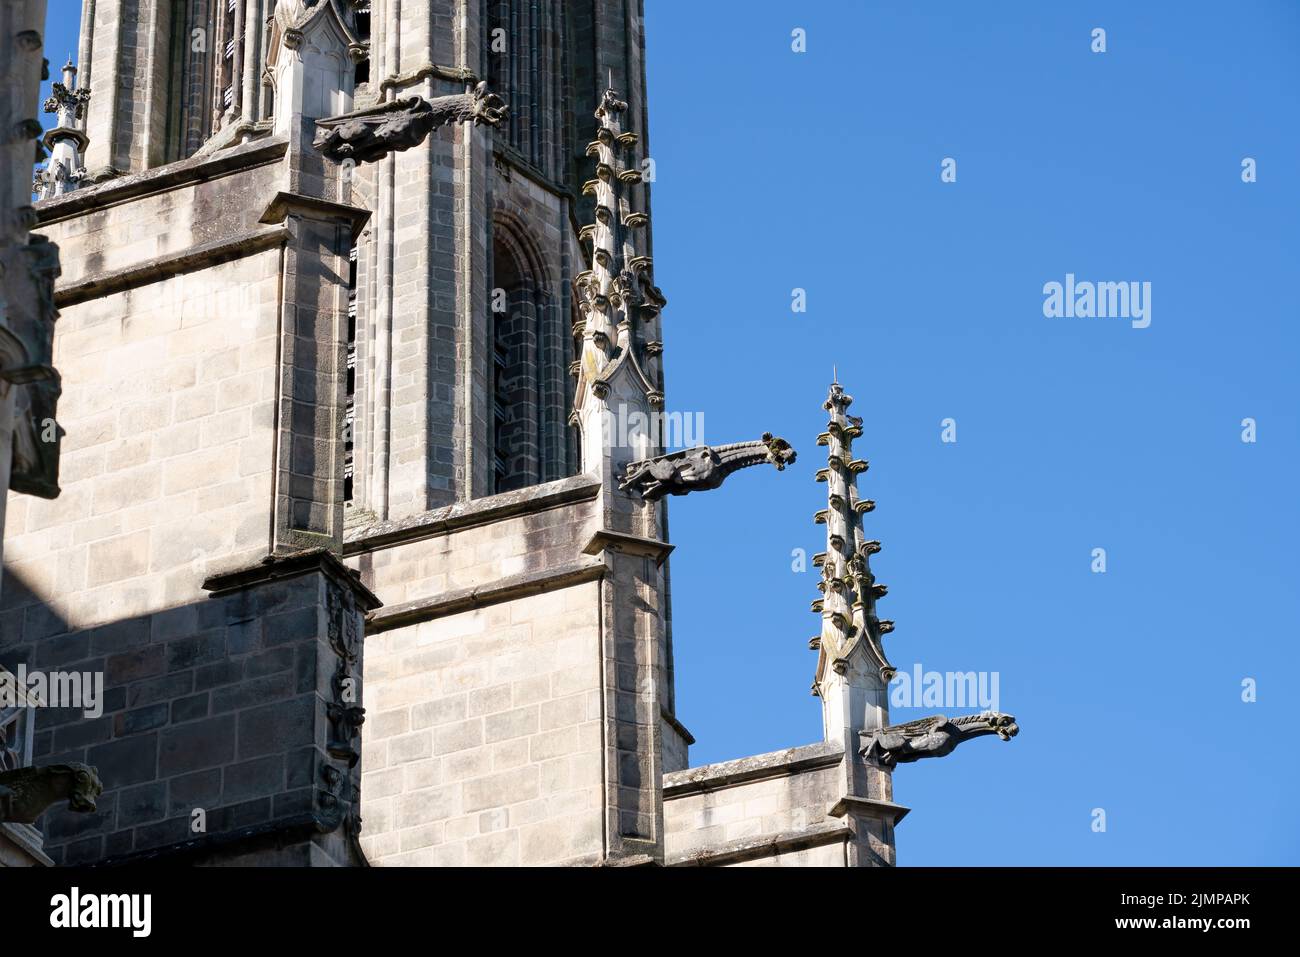 gargoyles and external architecture of a large gothic style church, Limoges France Stock Photo